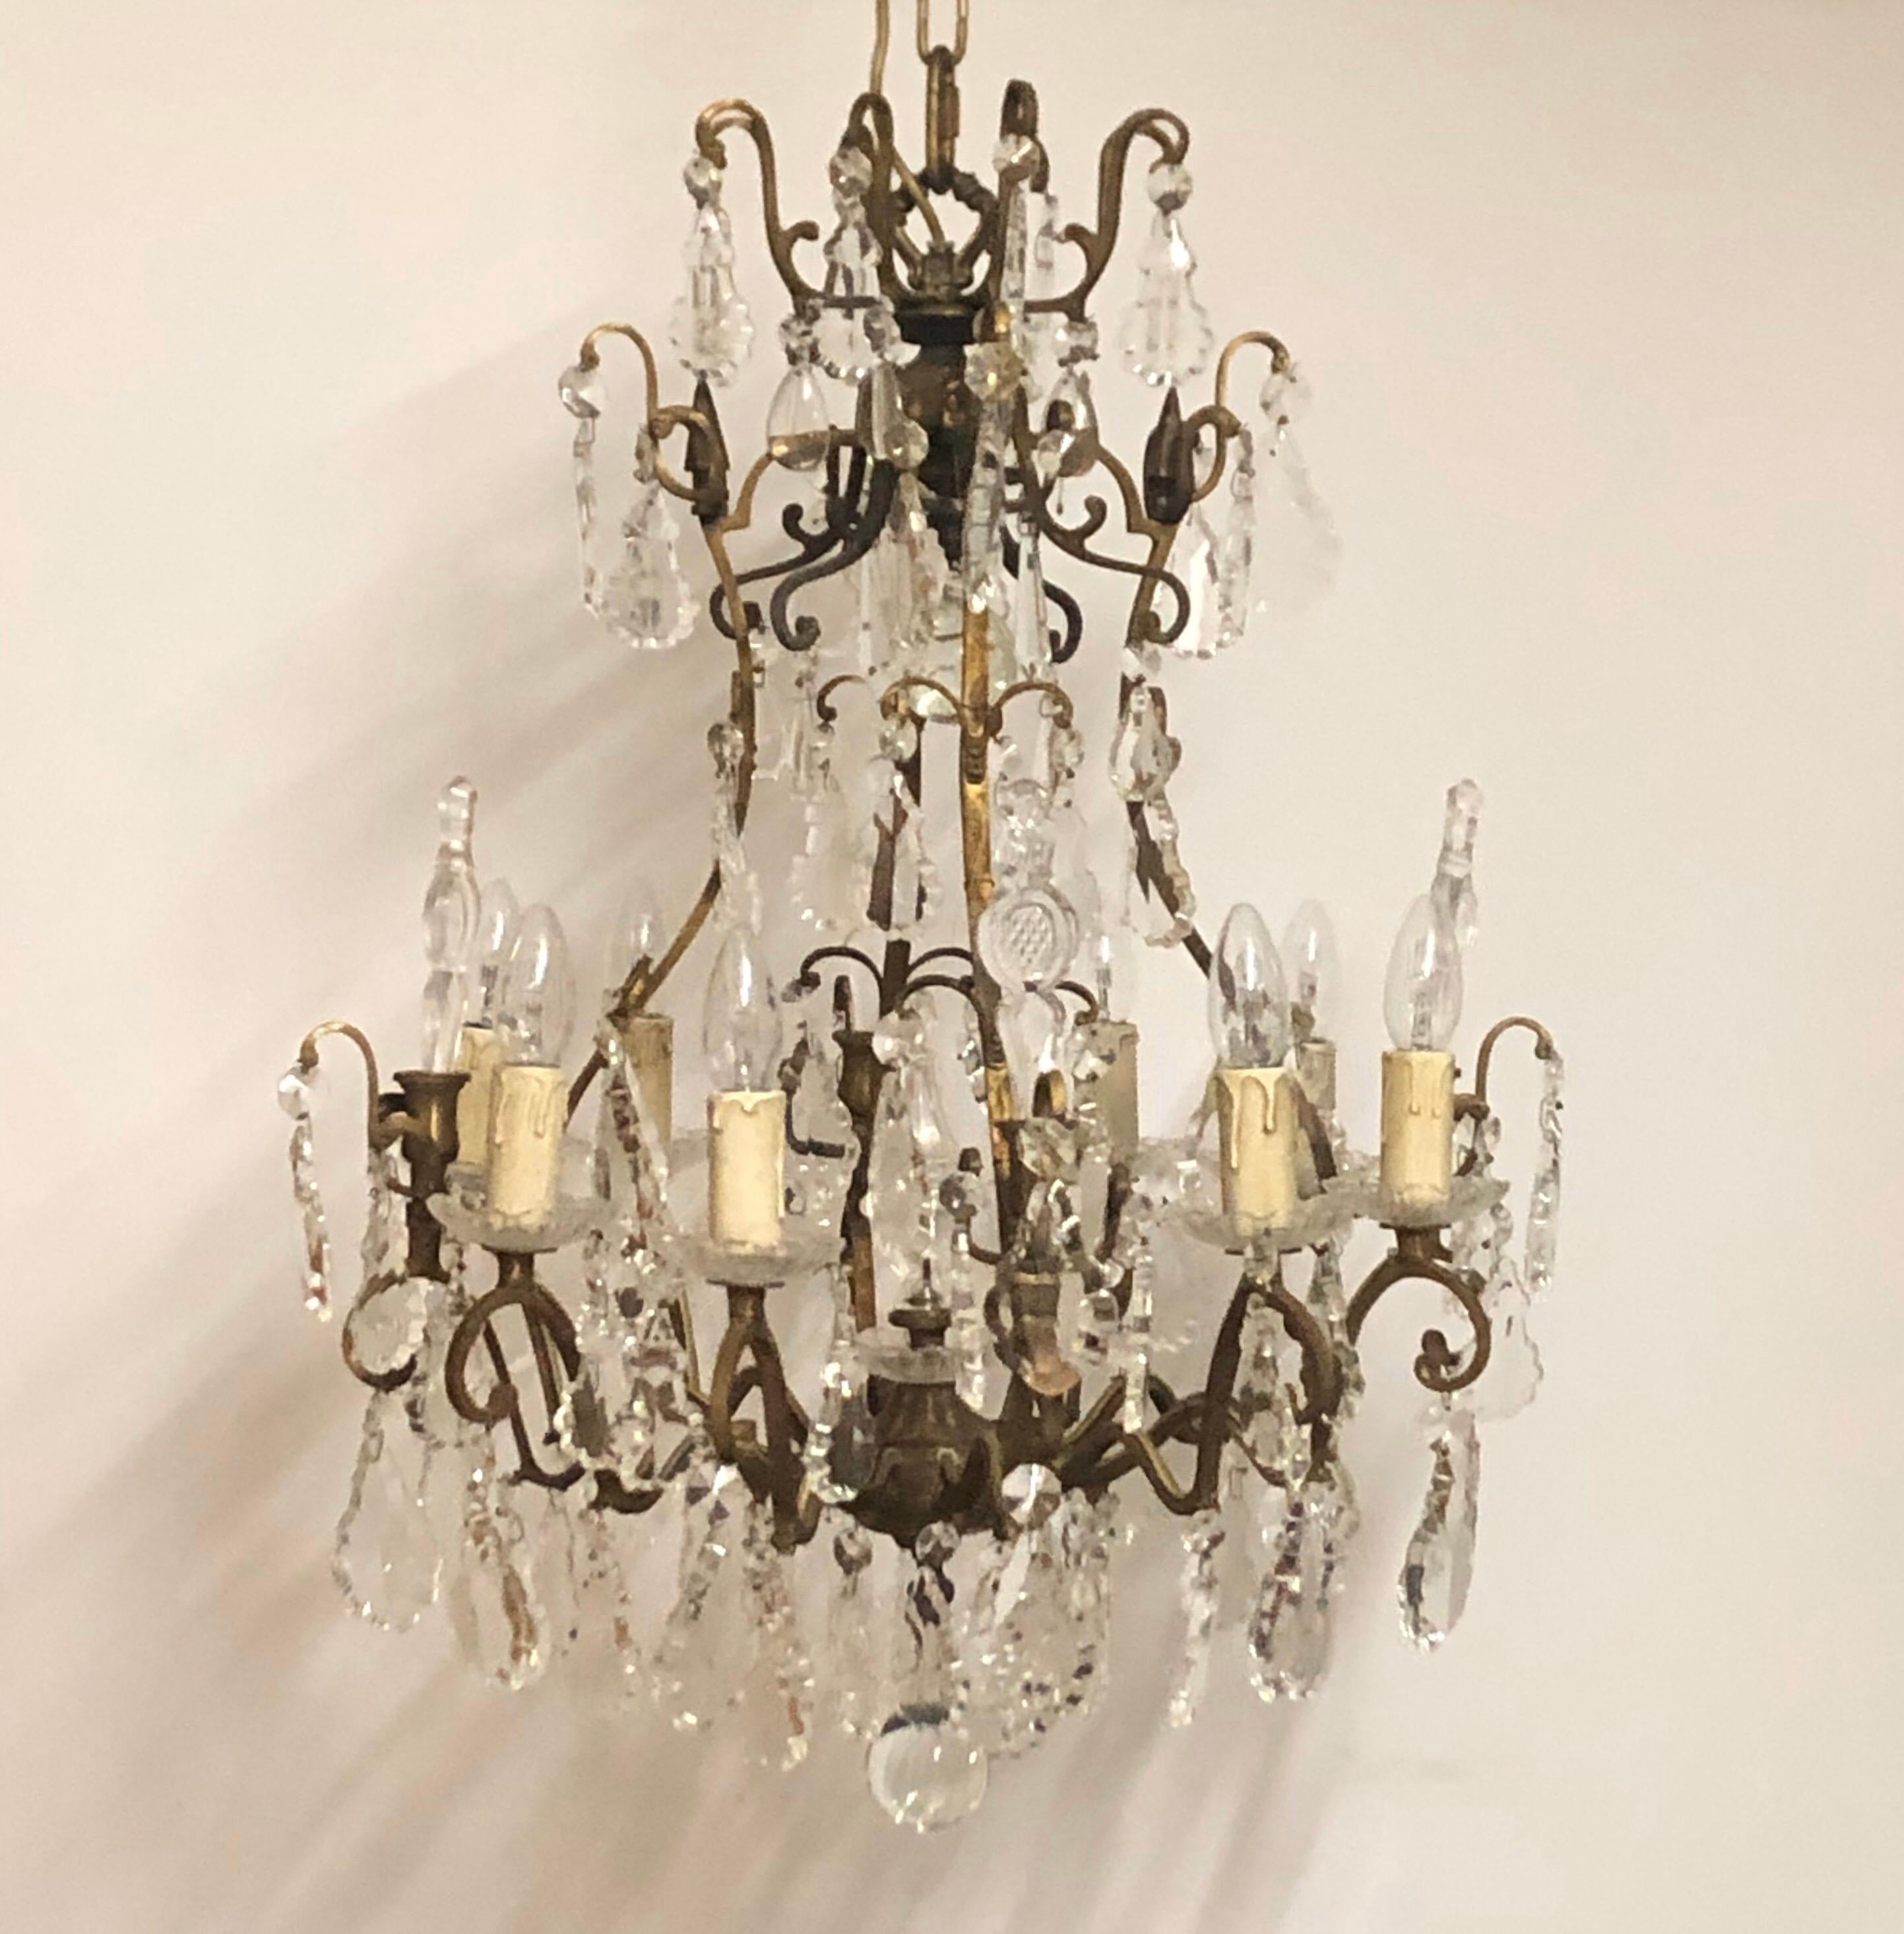 Beautiful eight -light massiv bronze and crystal glass chandelier, France, circa 1970s.
Pair available.
The height incl. chain is 55.11